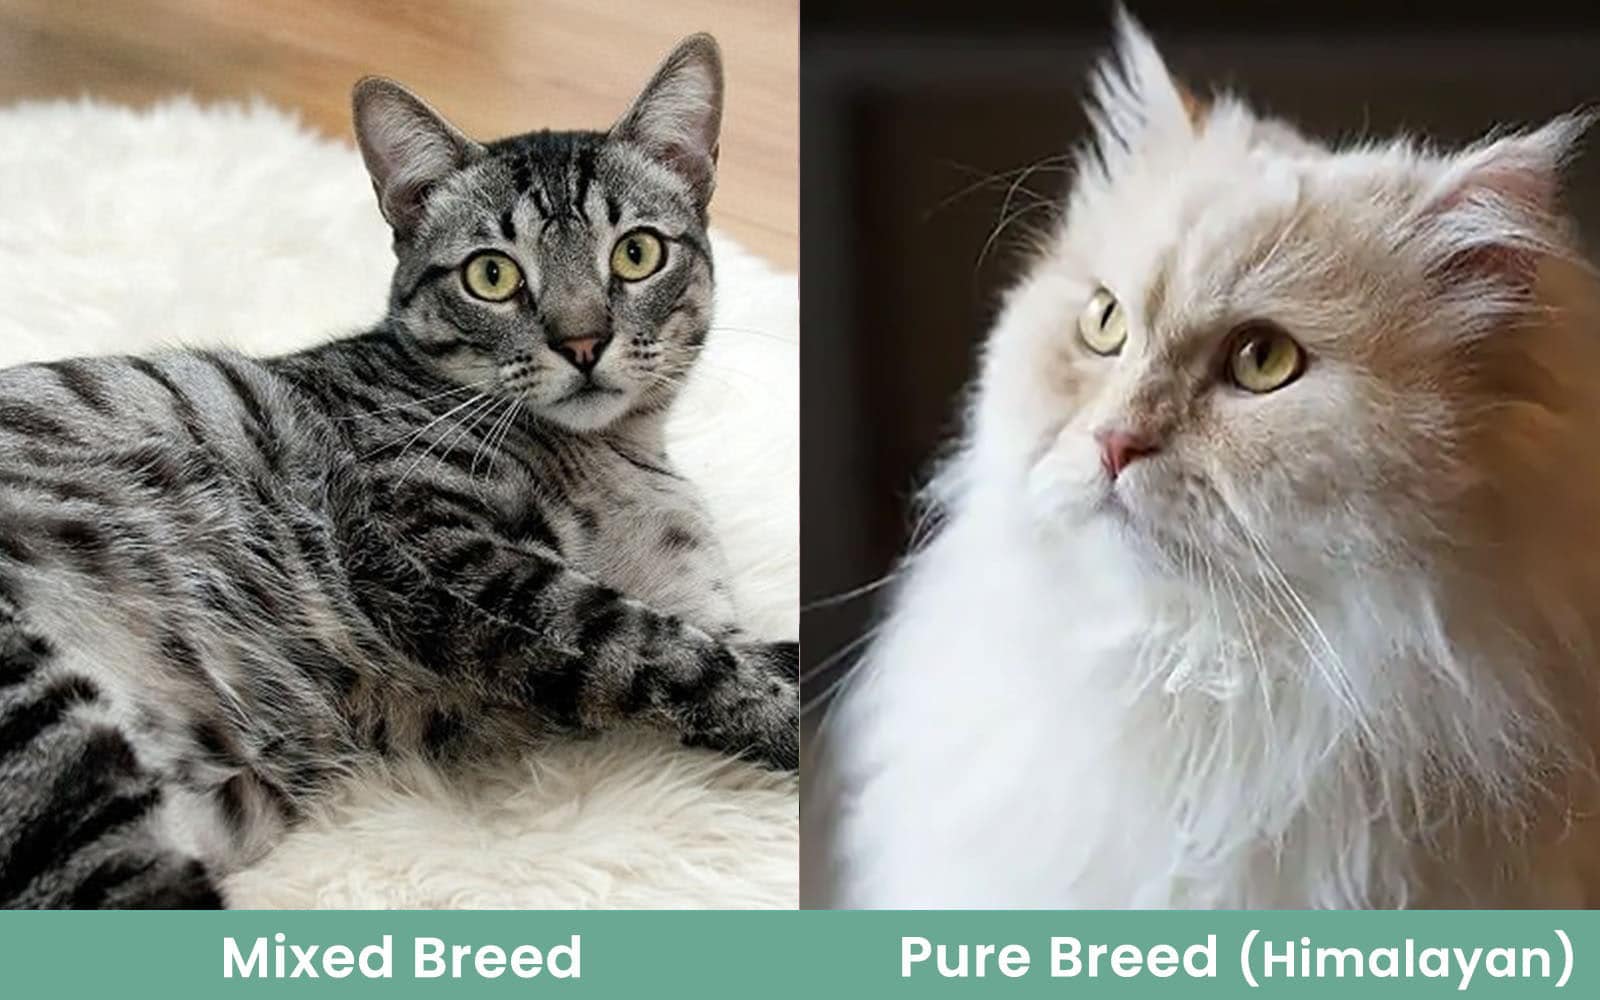 Pure or Not? Tips to Identify if Your Cat is a Purebred